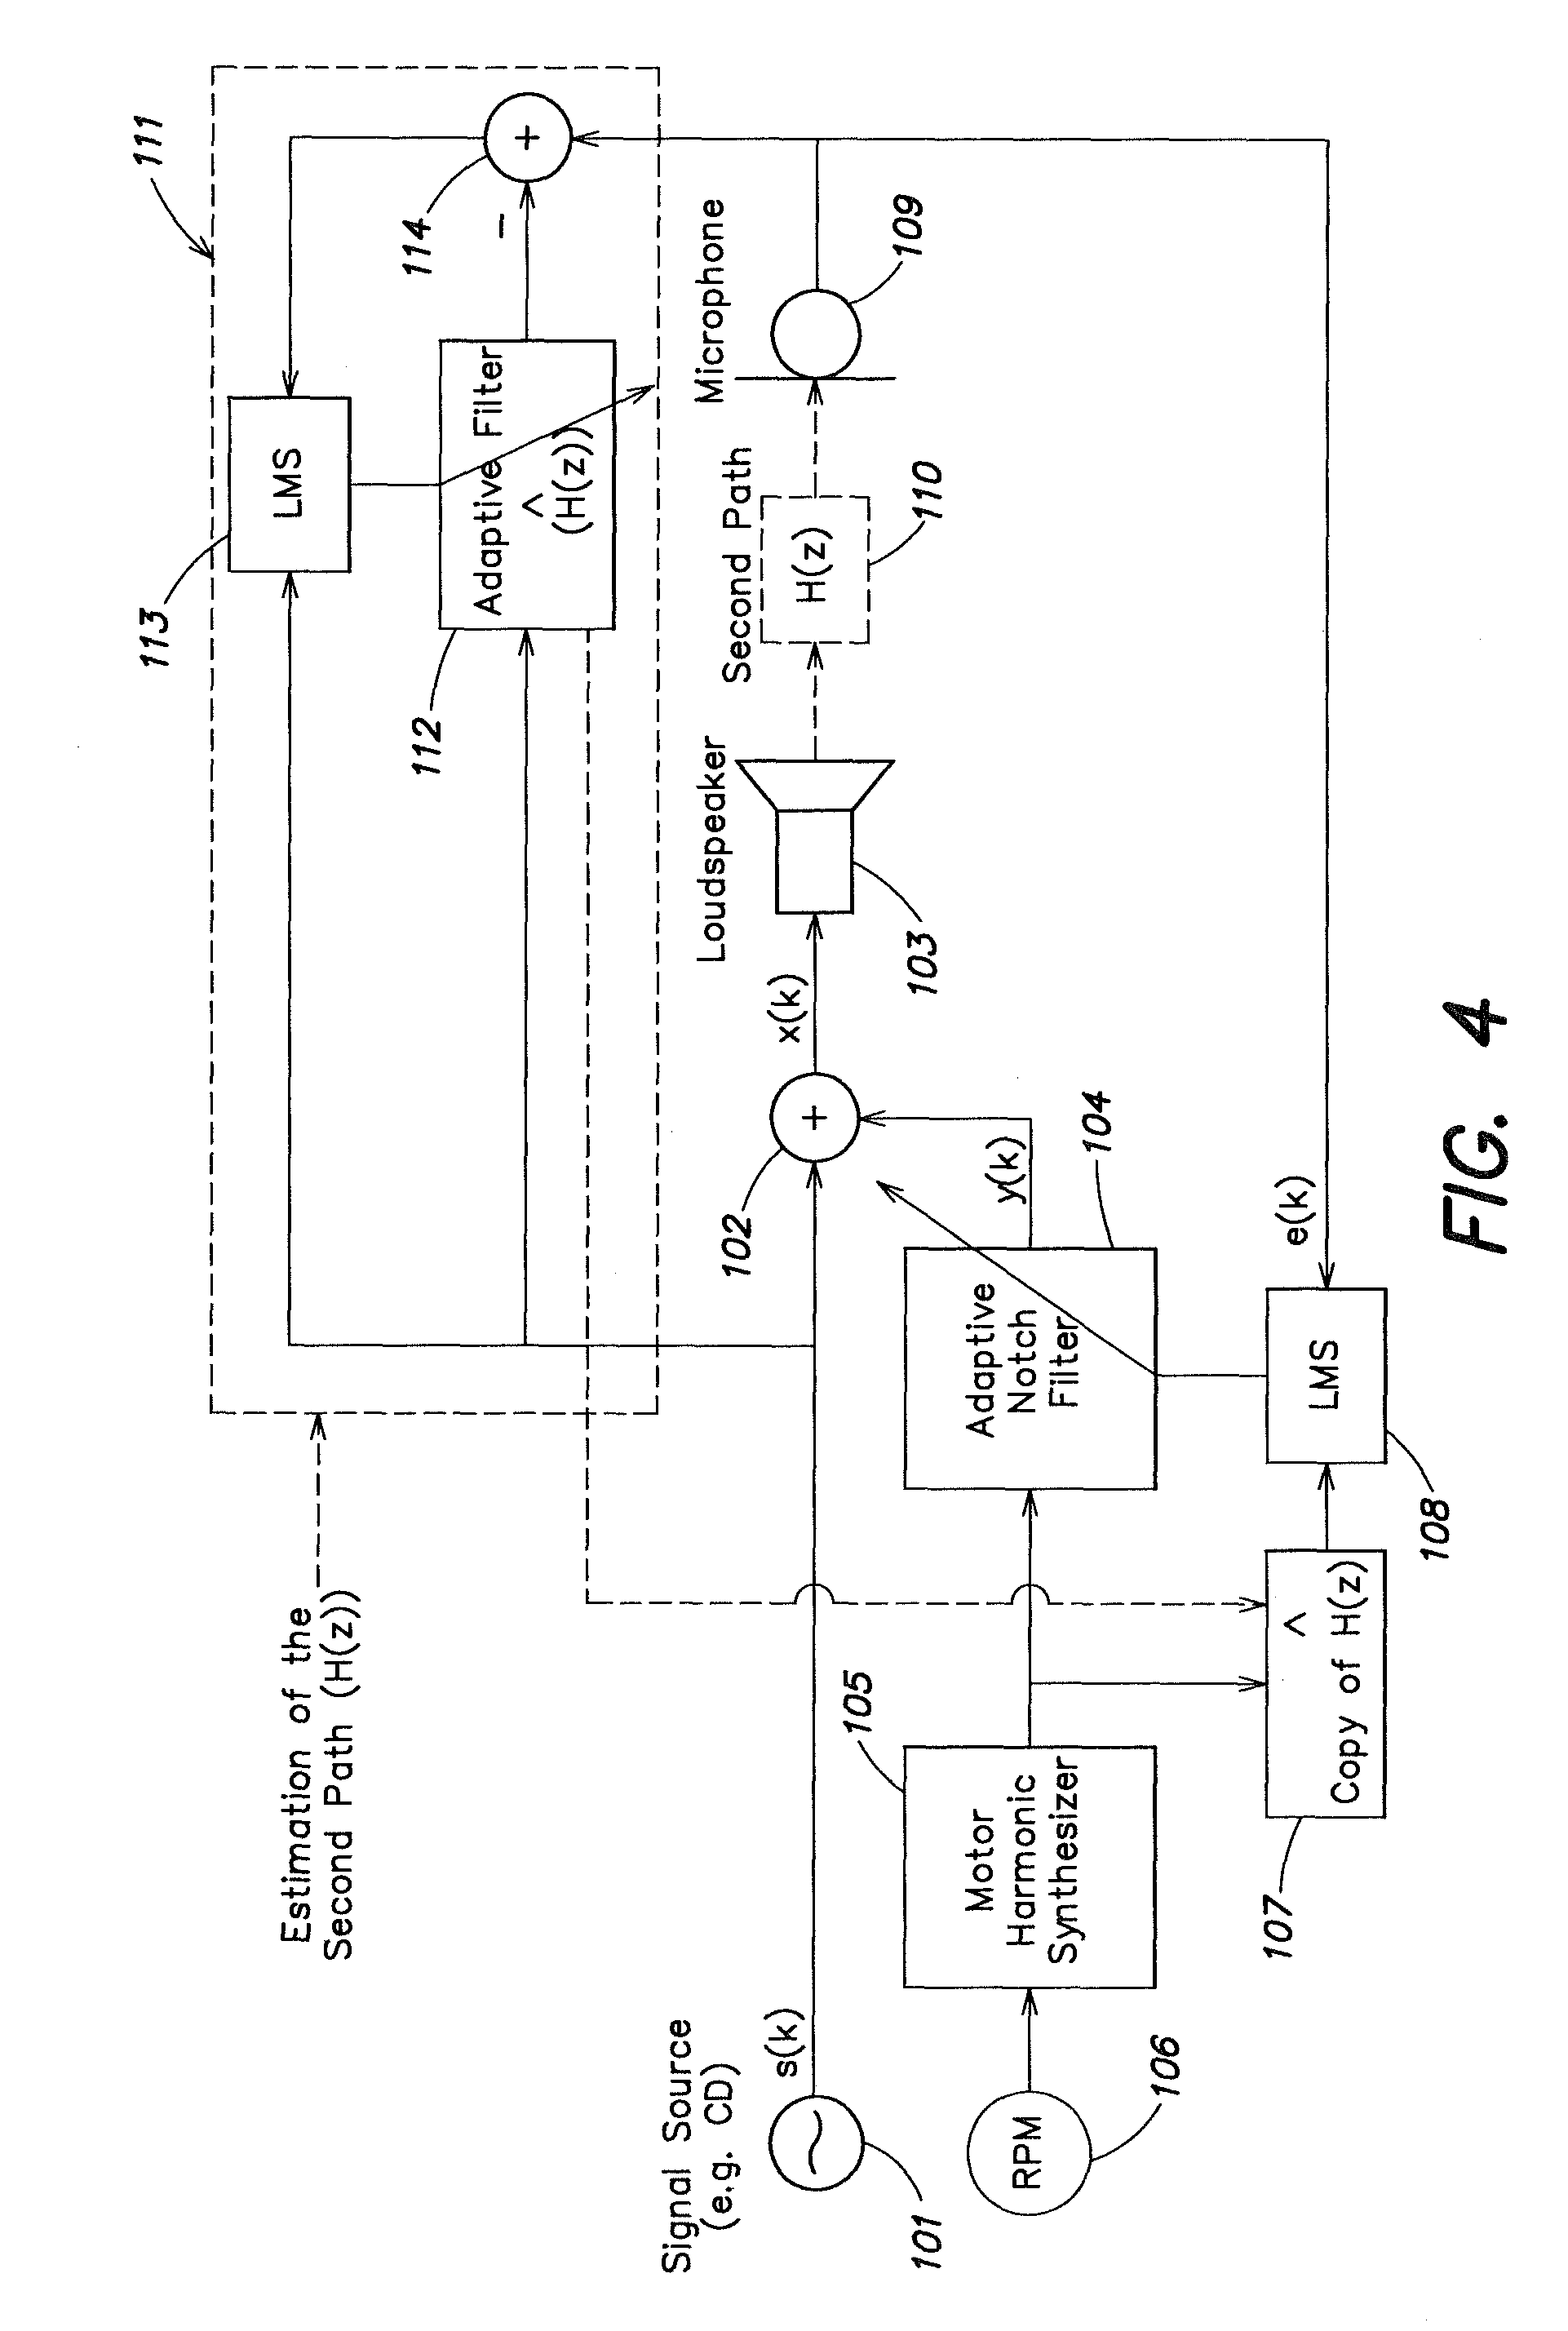 Active noise tuning system